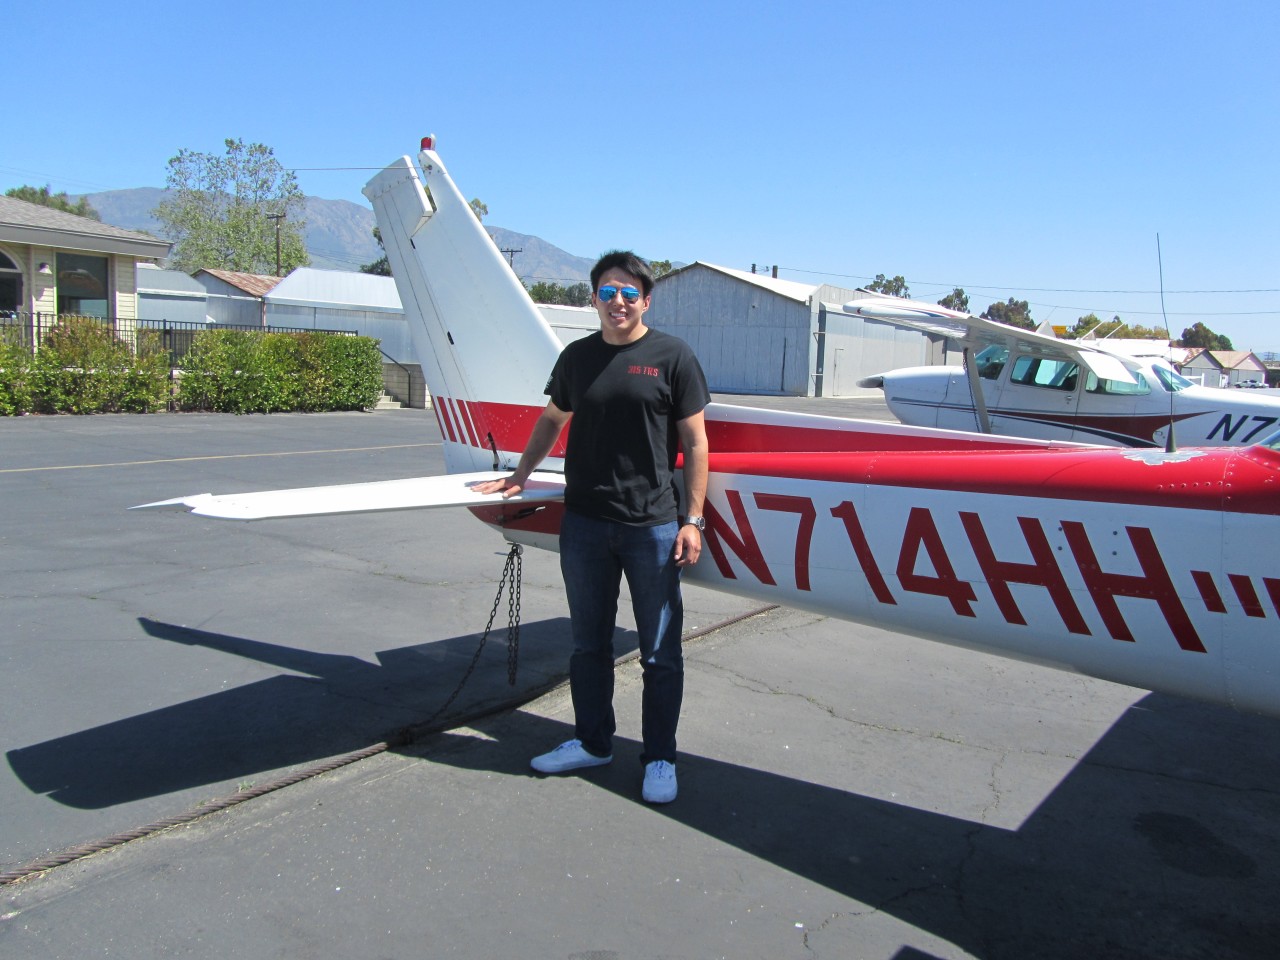 First Solo - Stephano Peluso!